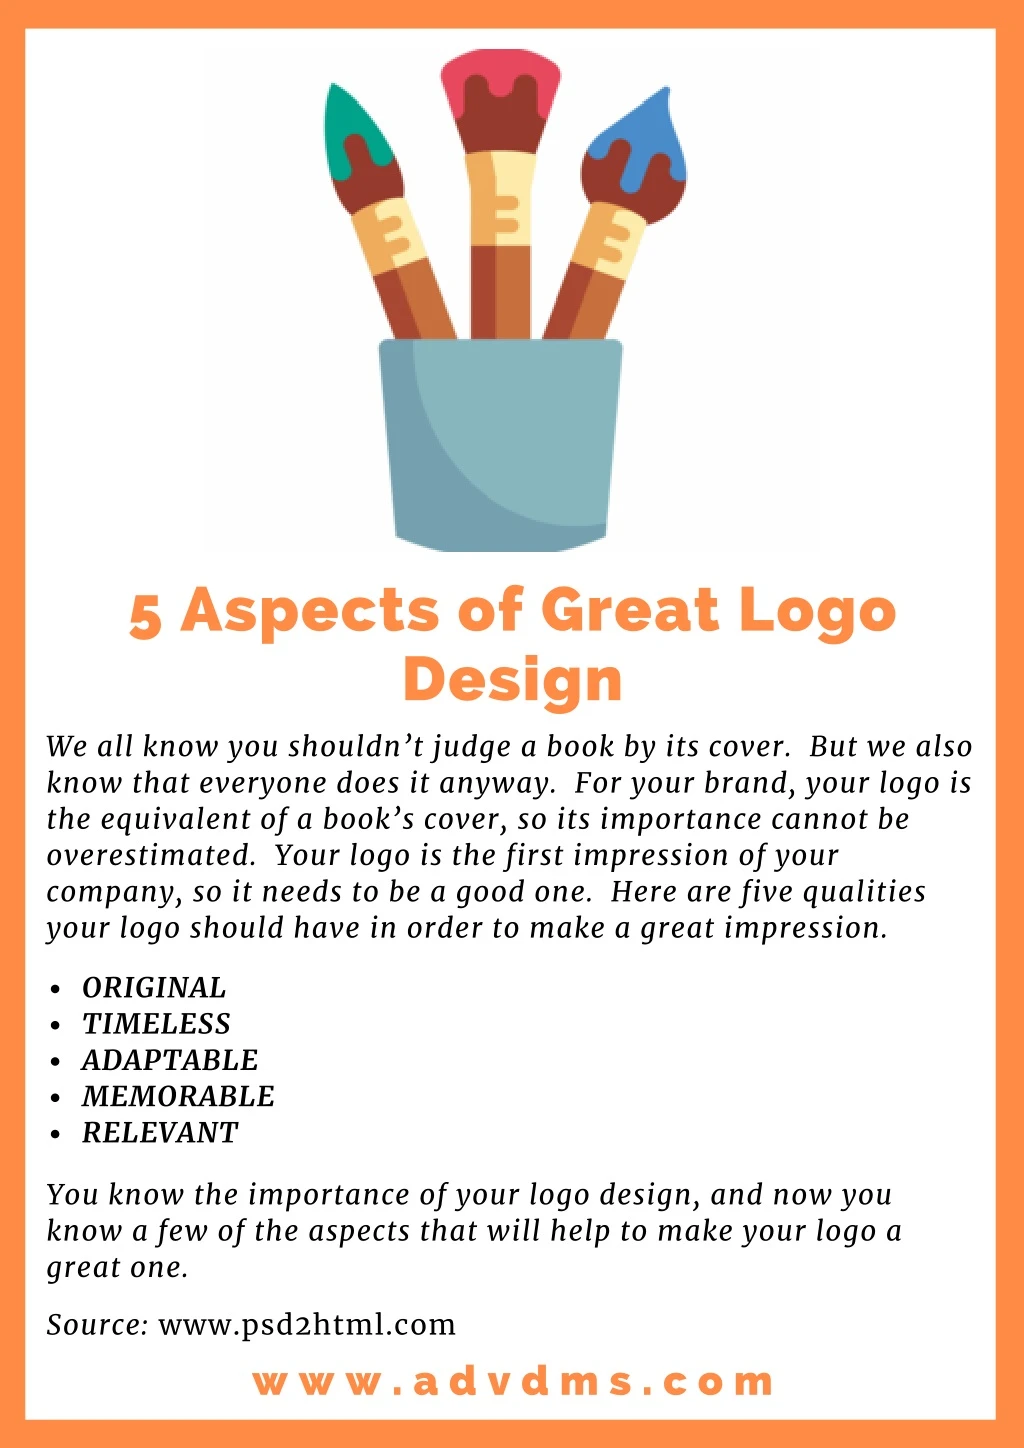 5 aspects of great logo